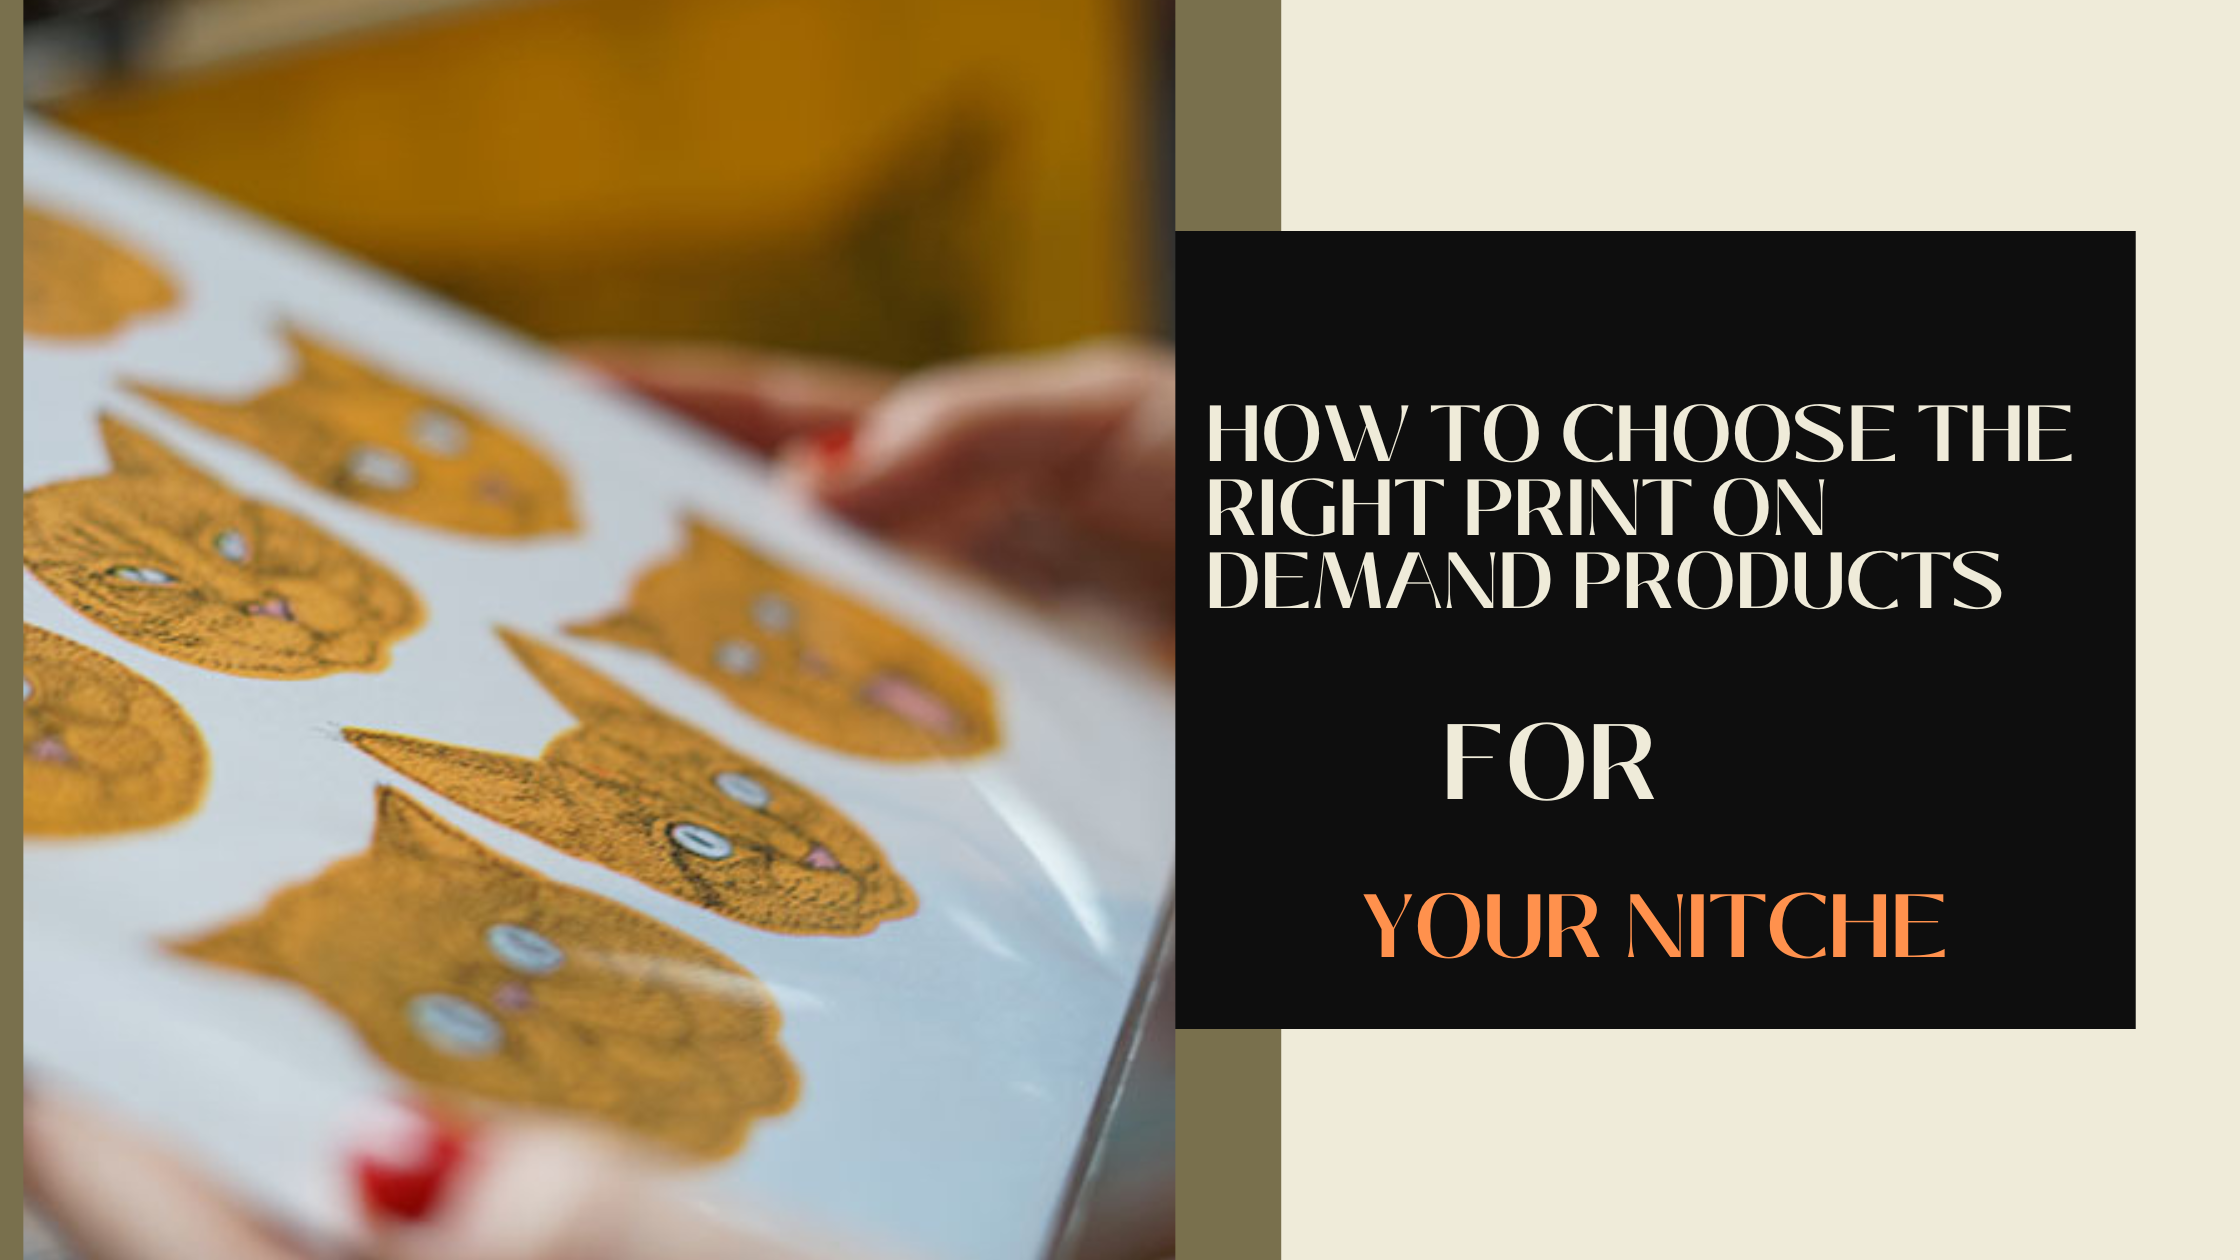 How to Choose the Right Print on Demand Products for Your Niche